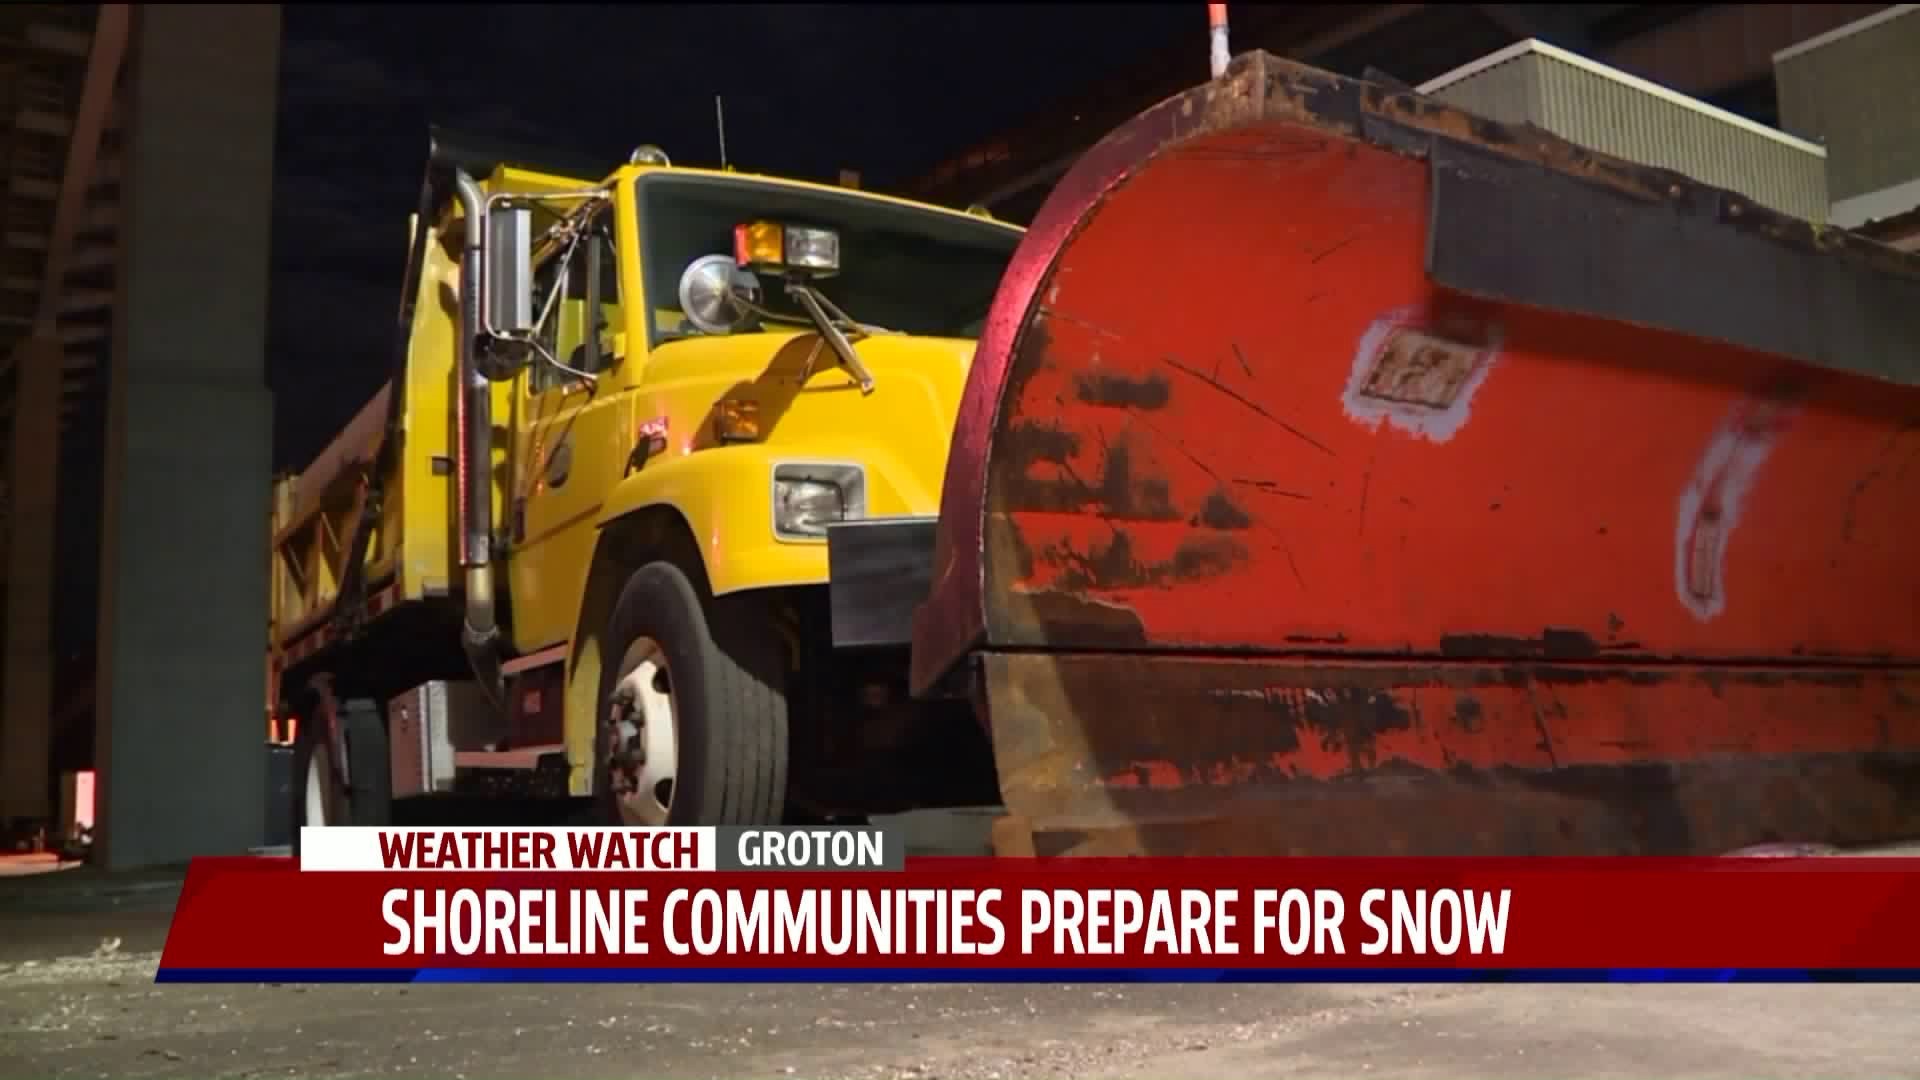 Universities and towns prepare for snowfall